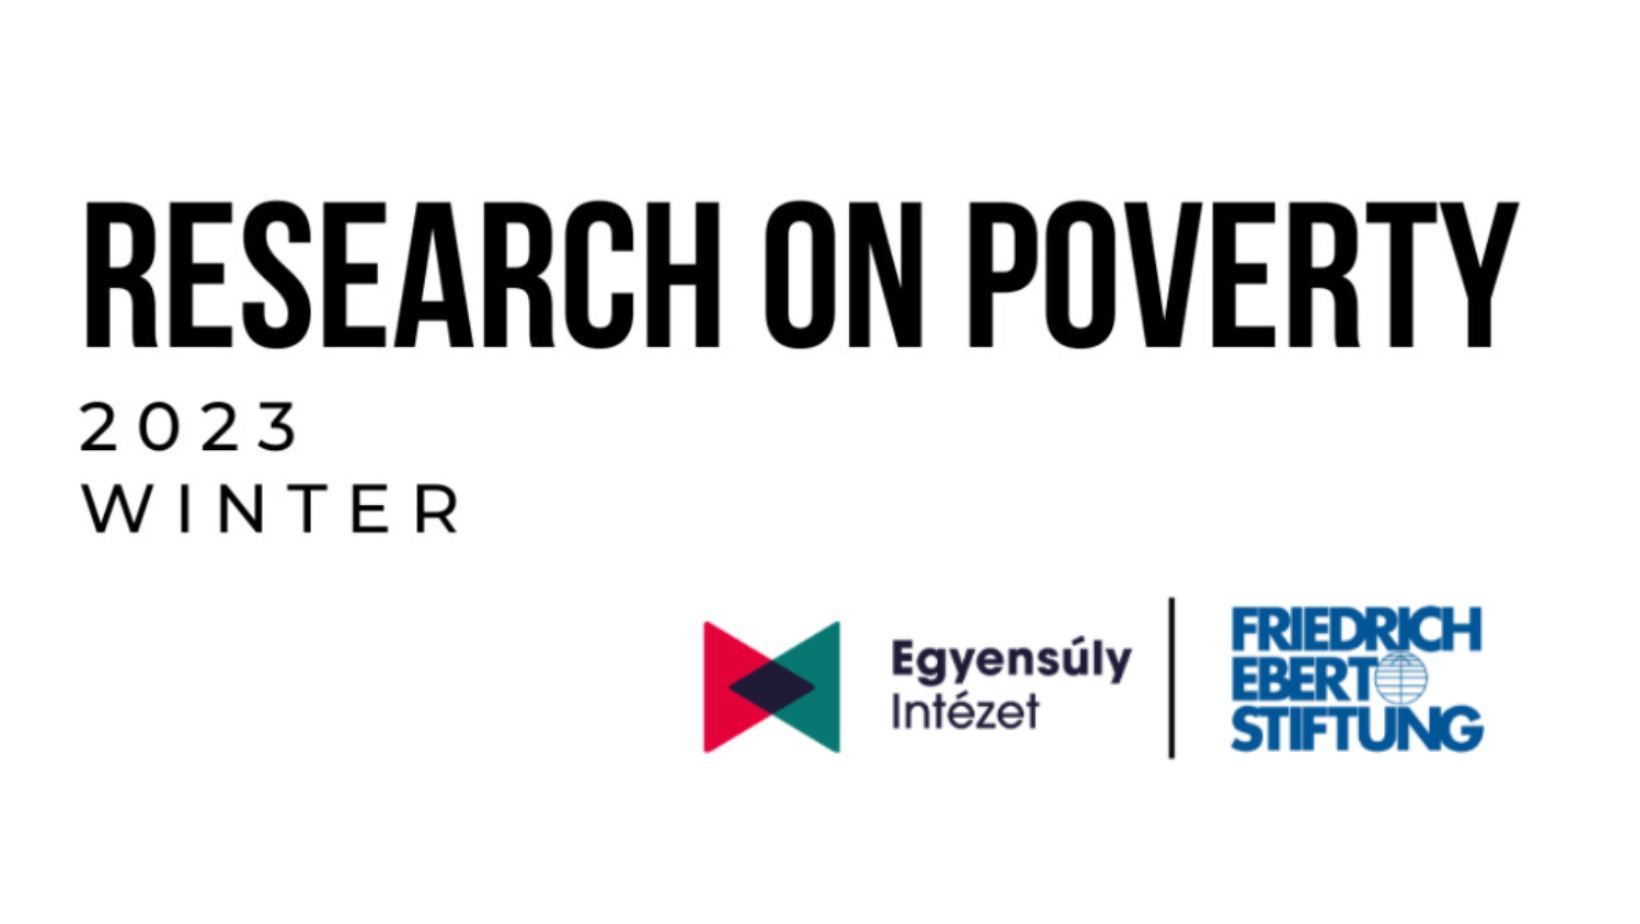 Research on poverty